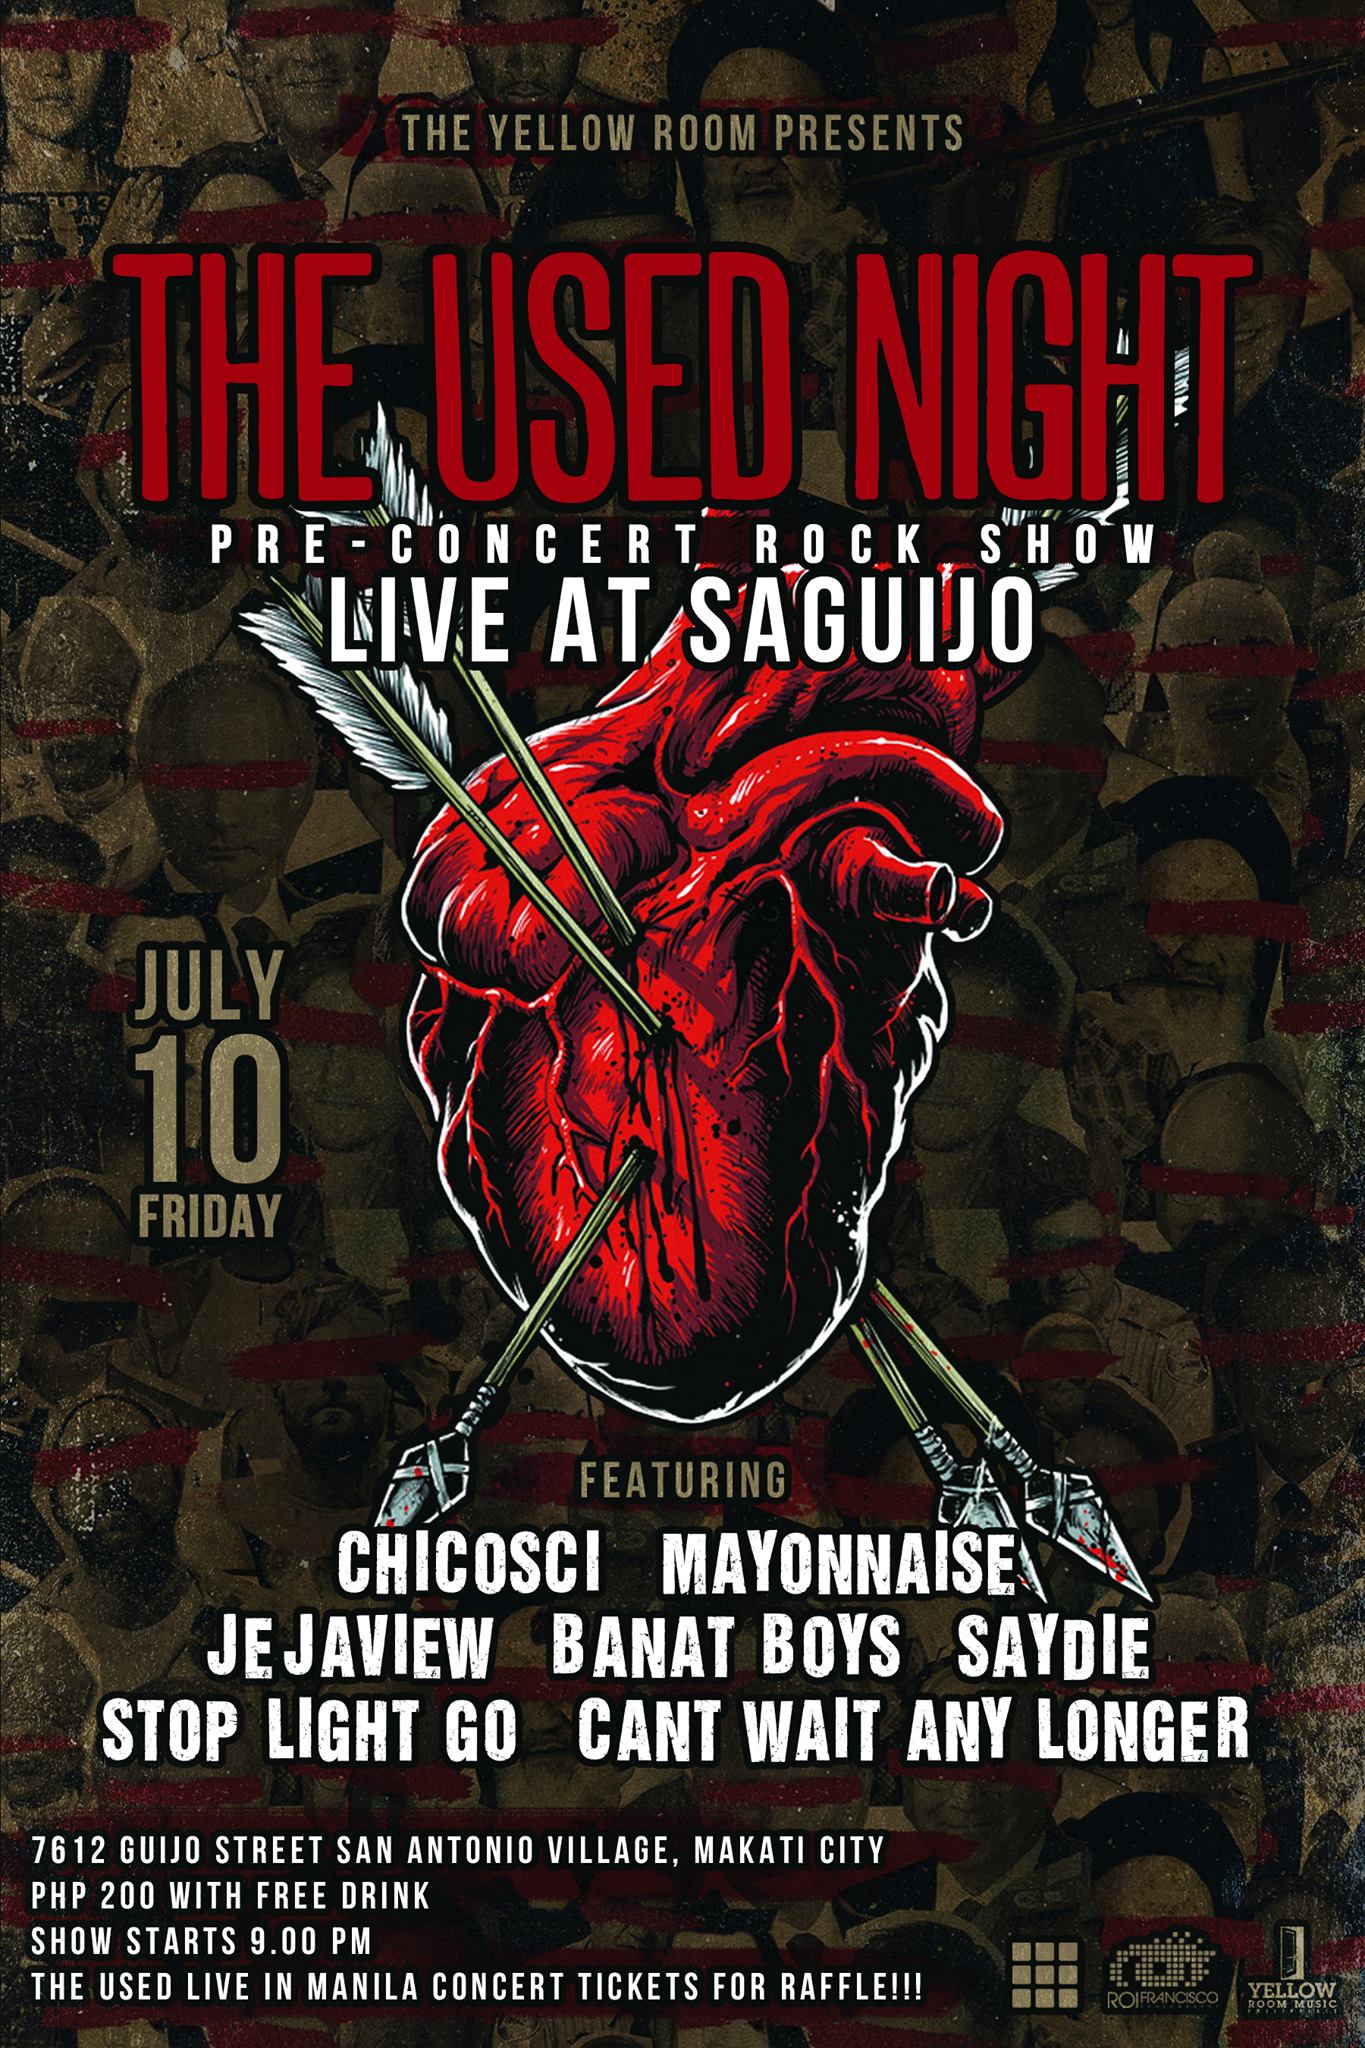 The Used Night: Pre-Concert Rock Show     Friday, July 10     at 9:00pm     4 days from now · 84°F / 77°F Rain     	     Show Map     saGuijo Cafe + Bar Events     7612 Guijo Street, San Antonio Village, 1203 Makati The Yellow Room presents: "The Used Night: Pre-Concert Rock Show" Featuring: • Chicosci • Mayonnaise • Jejaview (OFFICIAL) • Banat Boys • Saydie Official • Stop Light Go • Can't Wait Any Longer July 10, 2015 • Friday saGuijo Cafe + Bar Events • 7612 Guijo Street, San Antonio Village, Makati City Entrance: P200 with Free Drink Doors open at 8:30 pm Show starts at 9:00 pm • THE USED Live in Manila TICKETS for RAFFLE!!! For Concert Ticket inquiries kindly contact 403-4814 Special thanks to our partners: • Roi Francisco Photography + Design • The Right Frame Studios